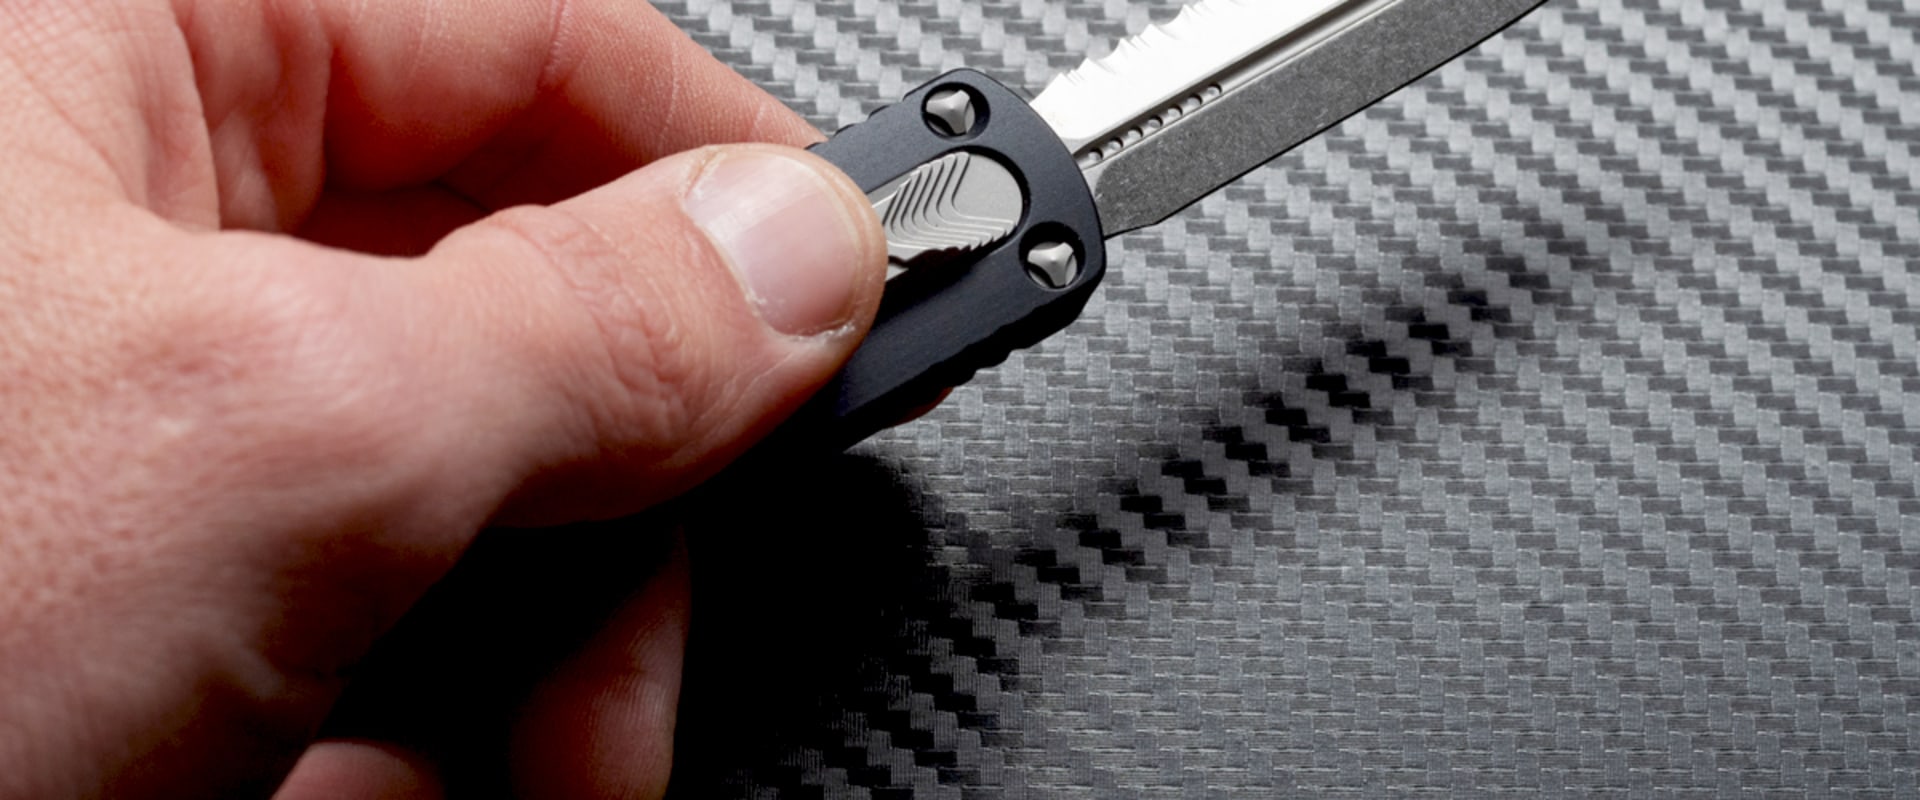 Can a Civilian Legally Buy an Automatic Knife Online?